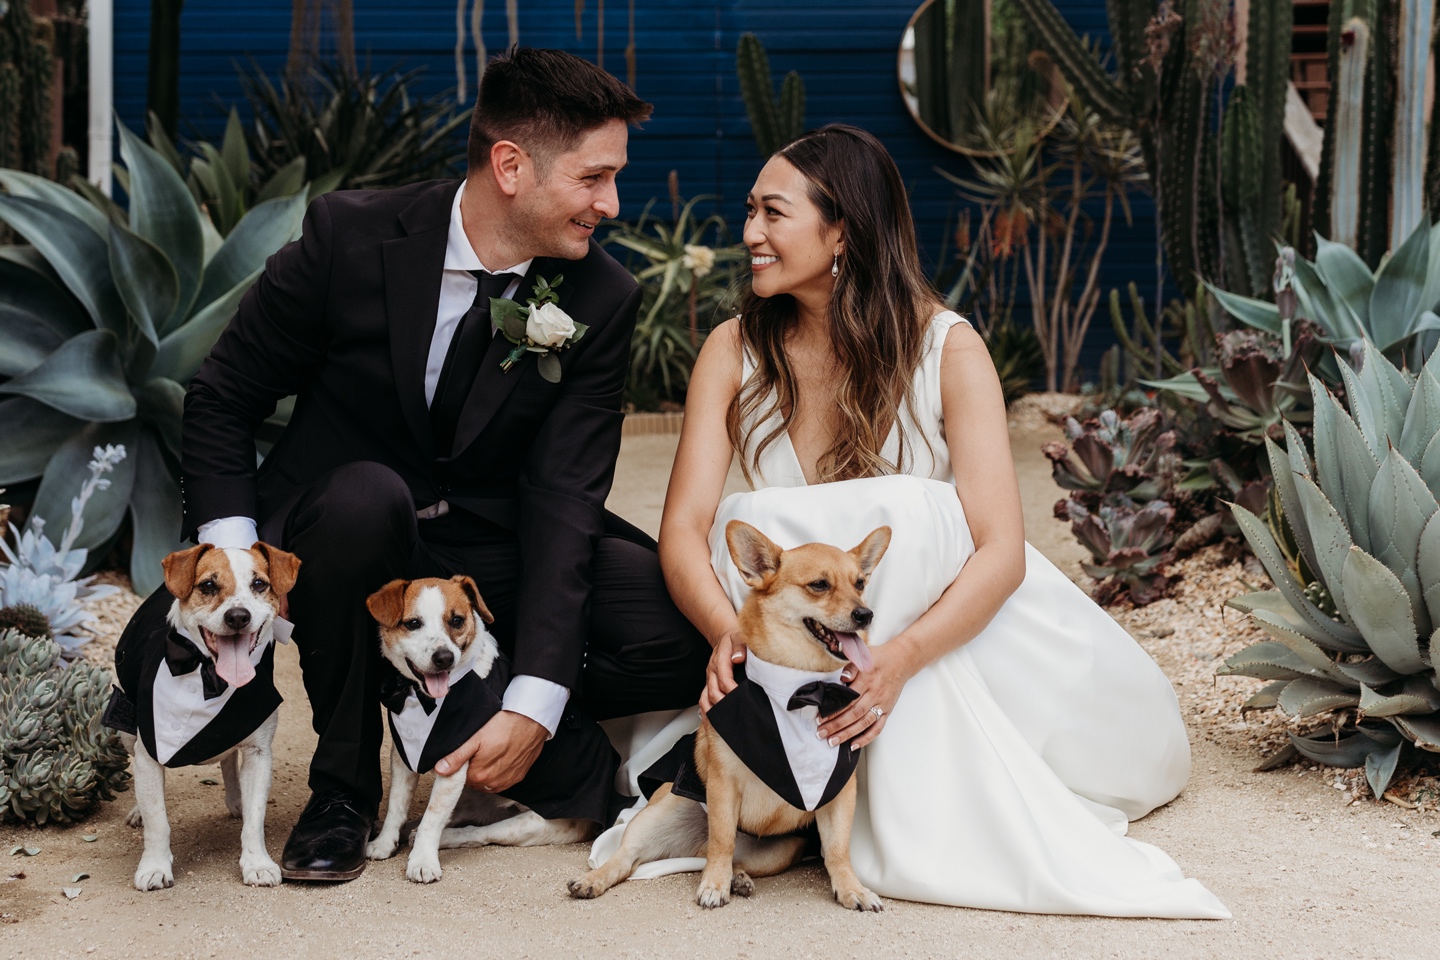 Bride and groom kneel while petting their three small dogs dressed in suits. Liz Koston Photography.